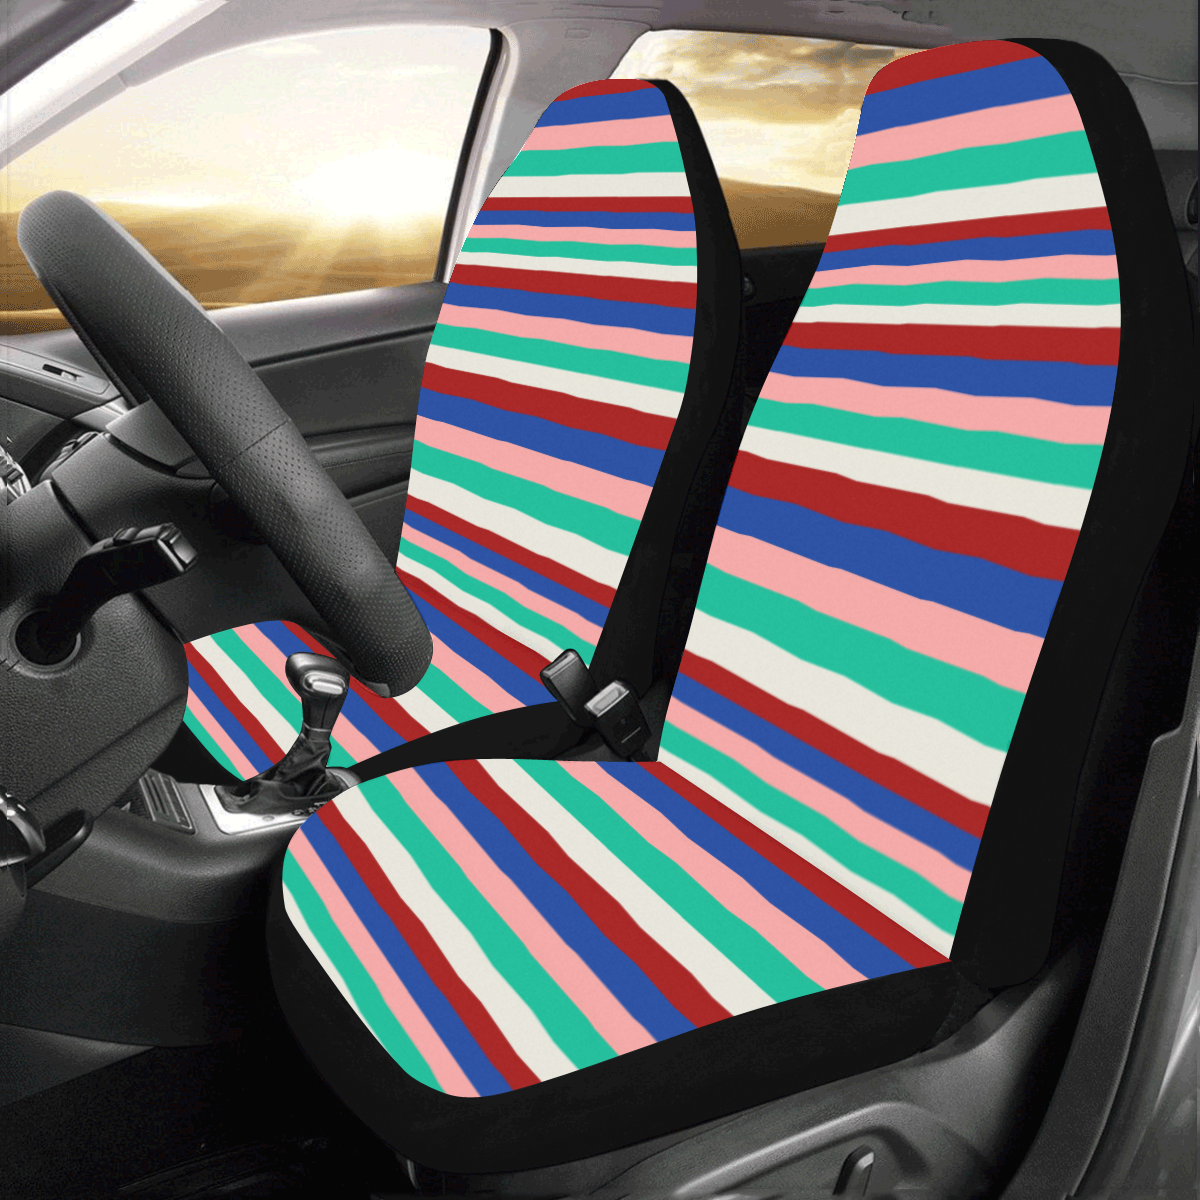 Colored Stripes - Dark Red Blue Rose Teal Cream Car Seat Covers (Set of 2)